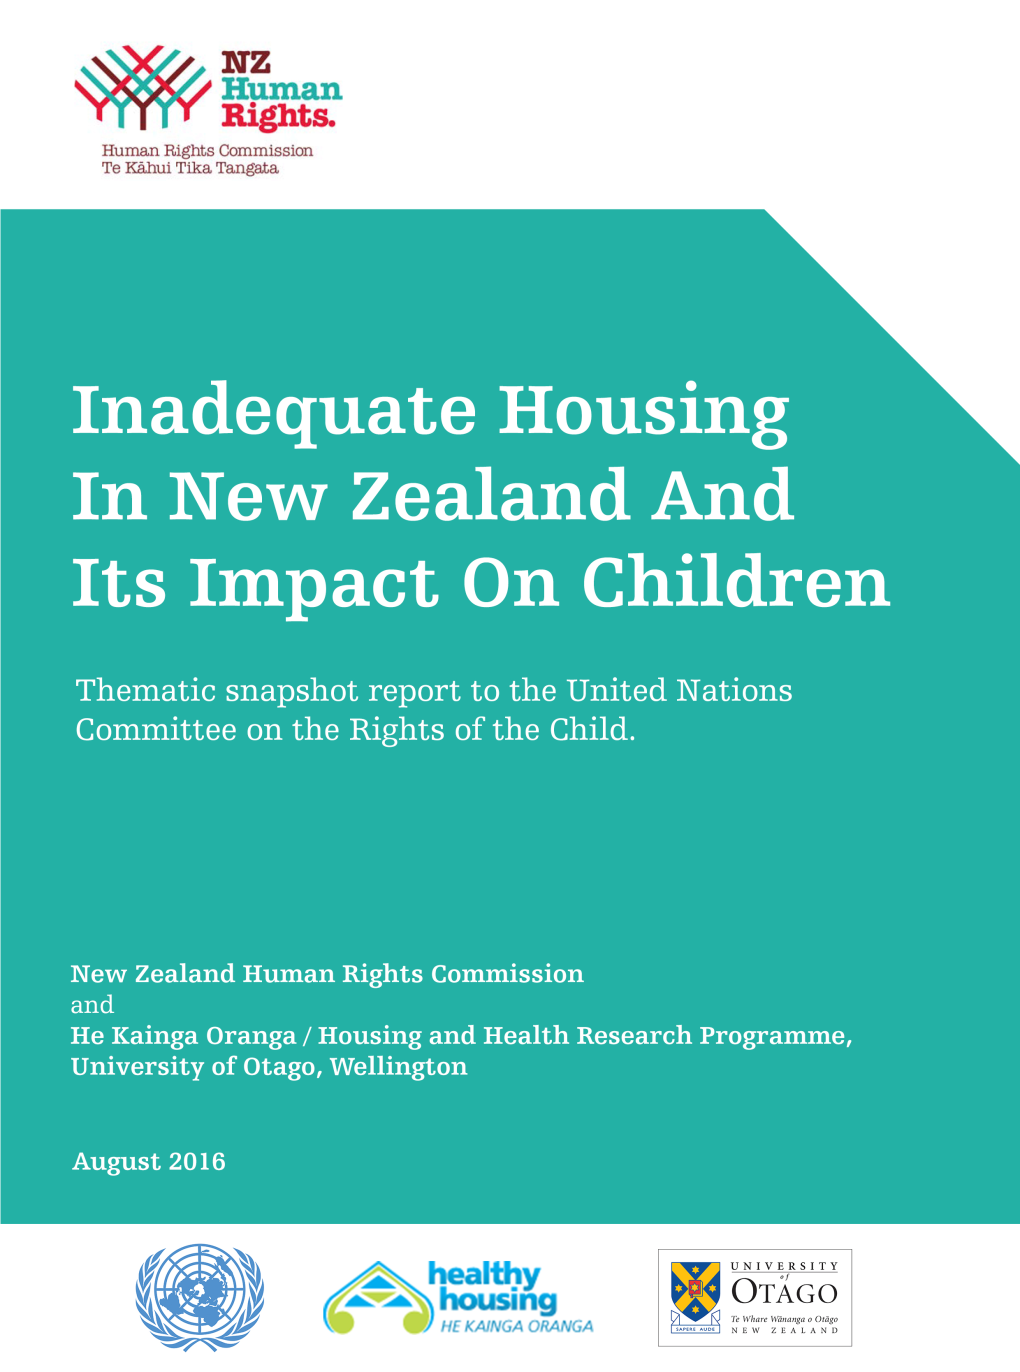 Inadequate Housing in New Zealand and Its Impact on Children